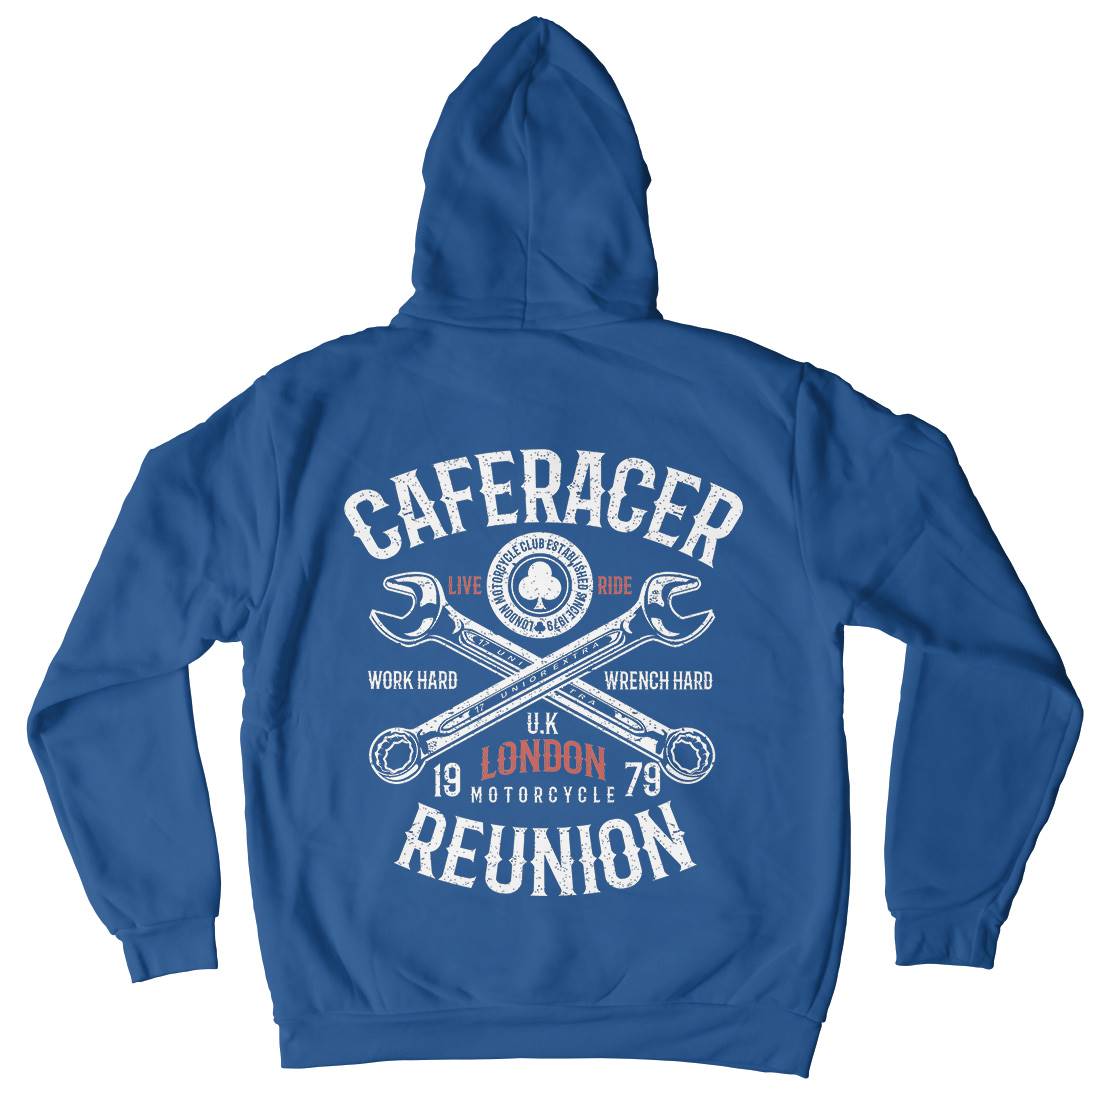 Caferacer Reunion Mens Hoodie With Pocket Motorcycles A025